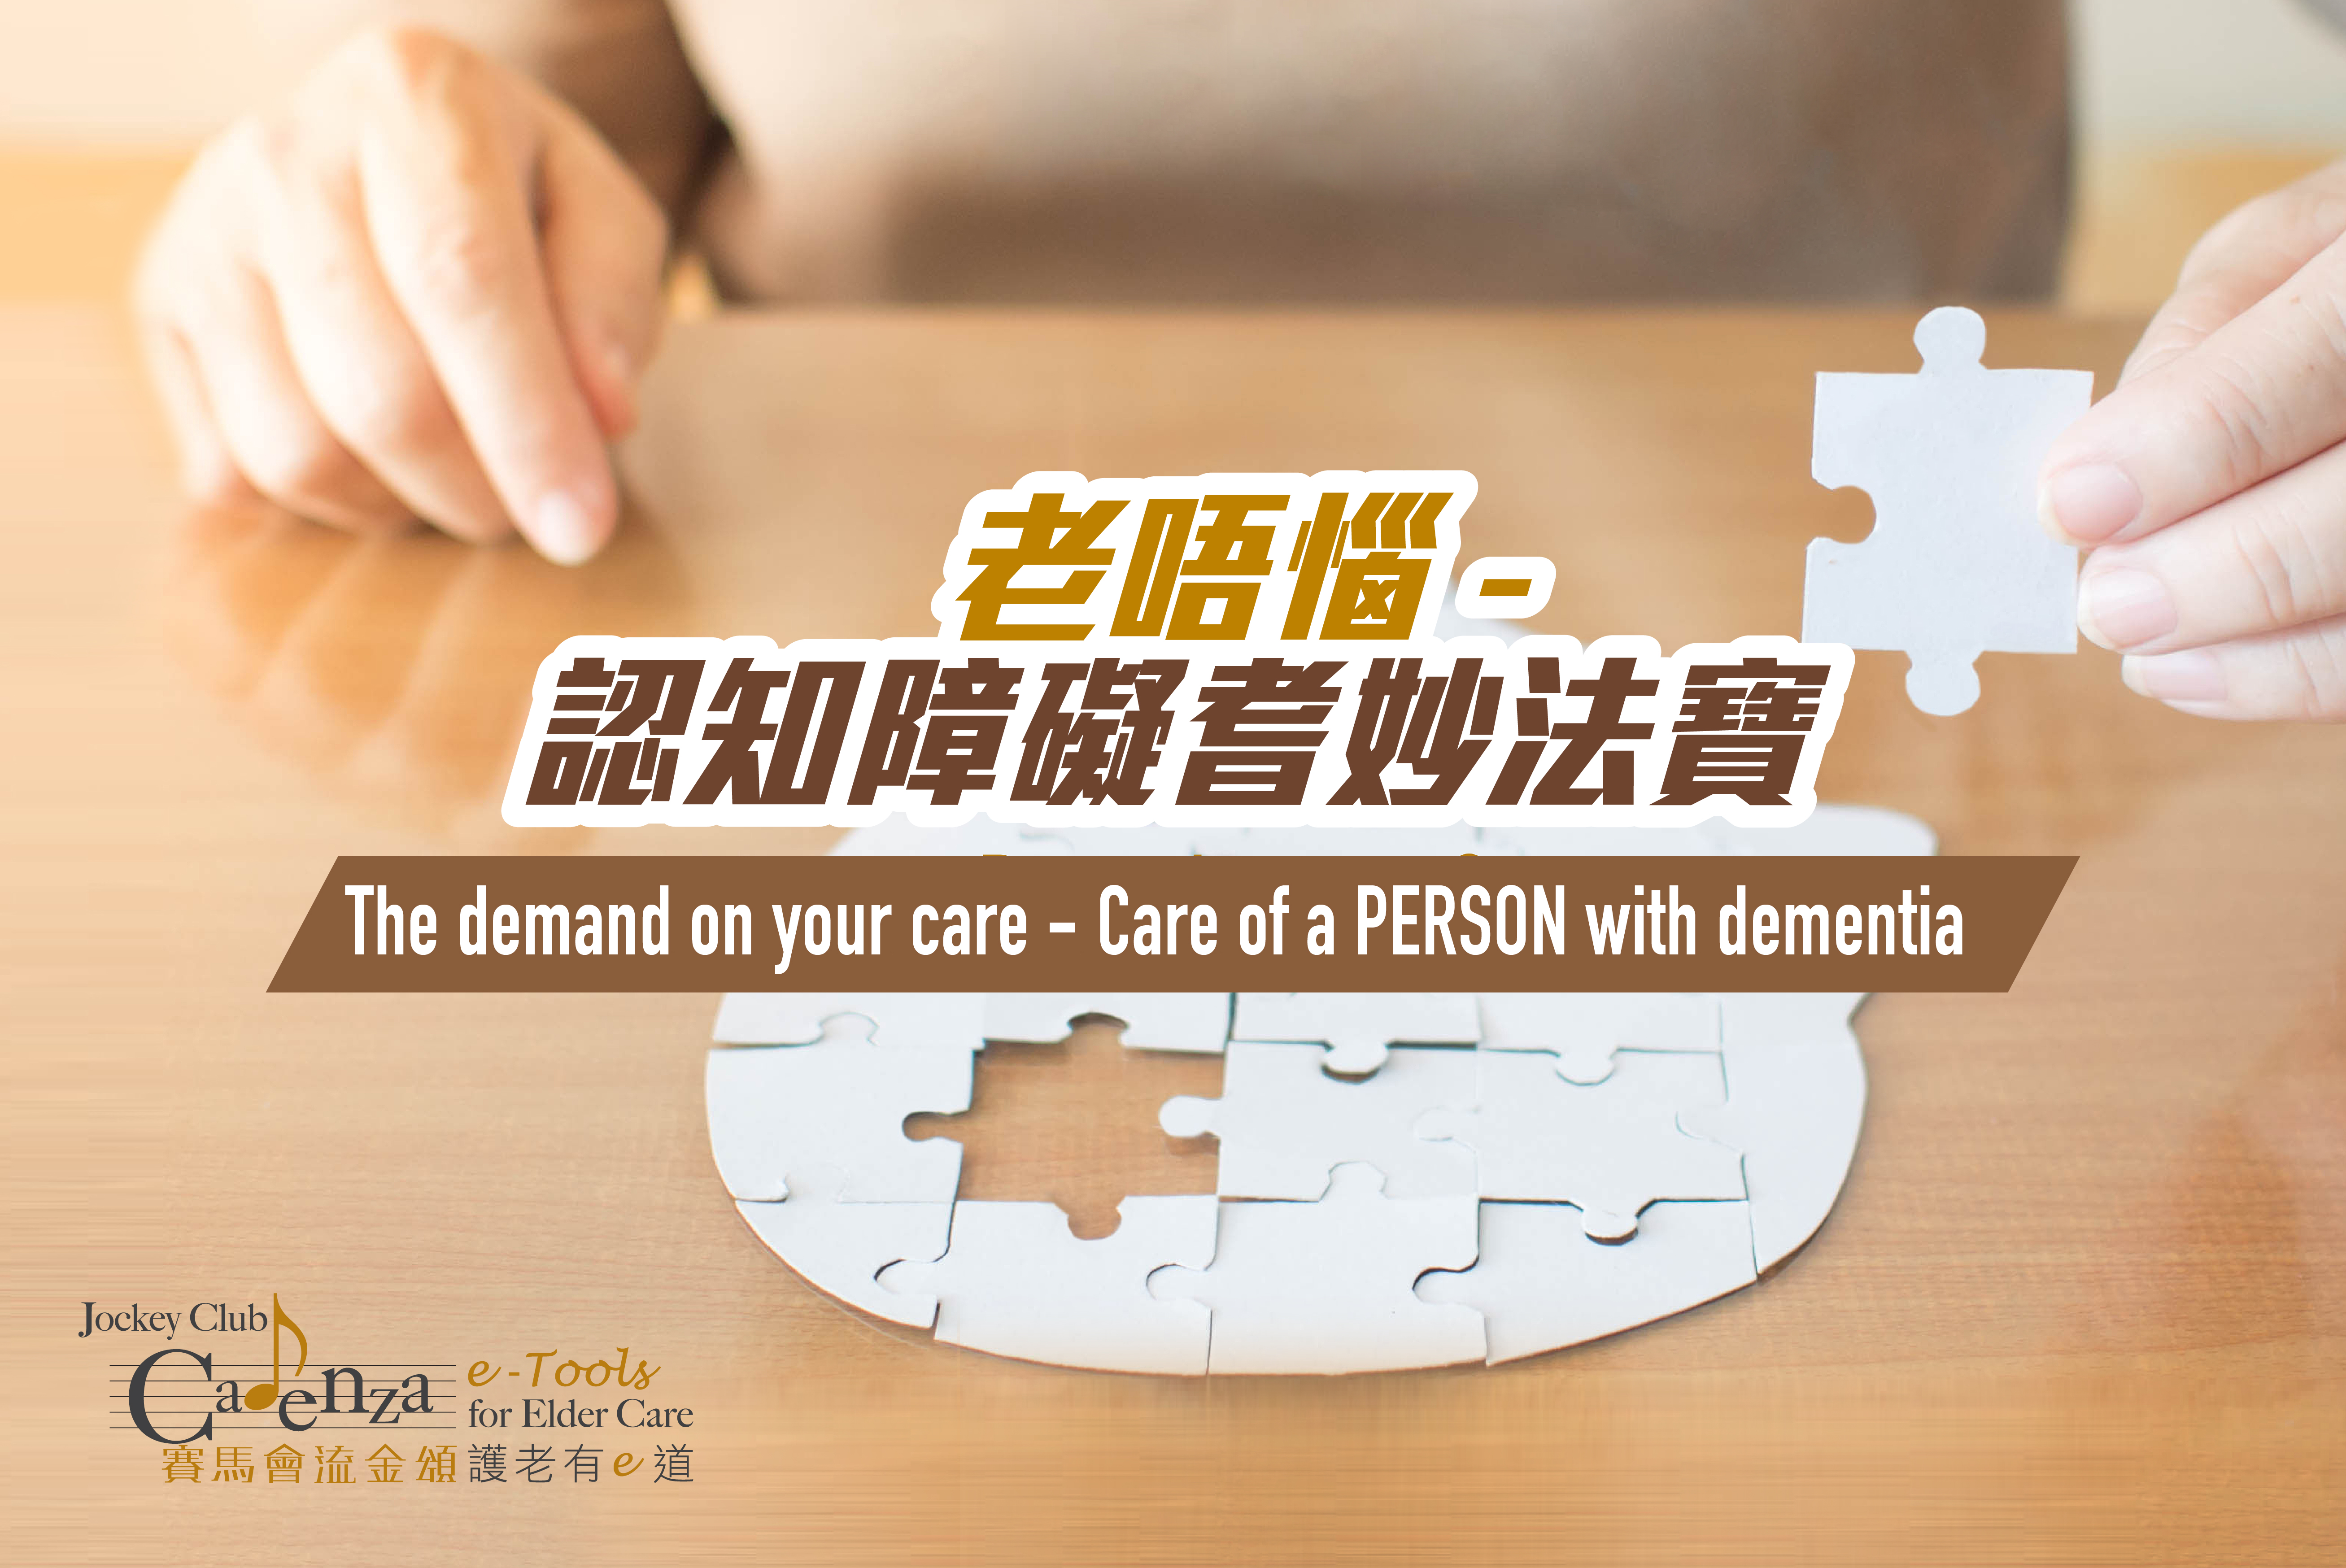 CUHK Jockey Club Institute of Ageing - Jockey Club CADENZA e-Tools for Elder Care: The demand on your care - Care of a PERSON with dementia